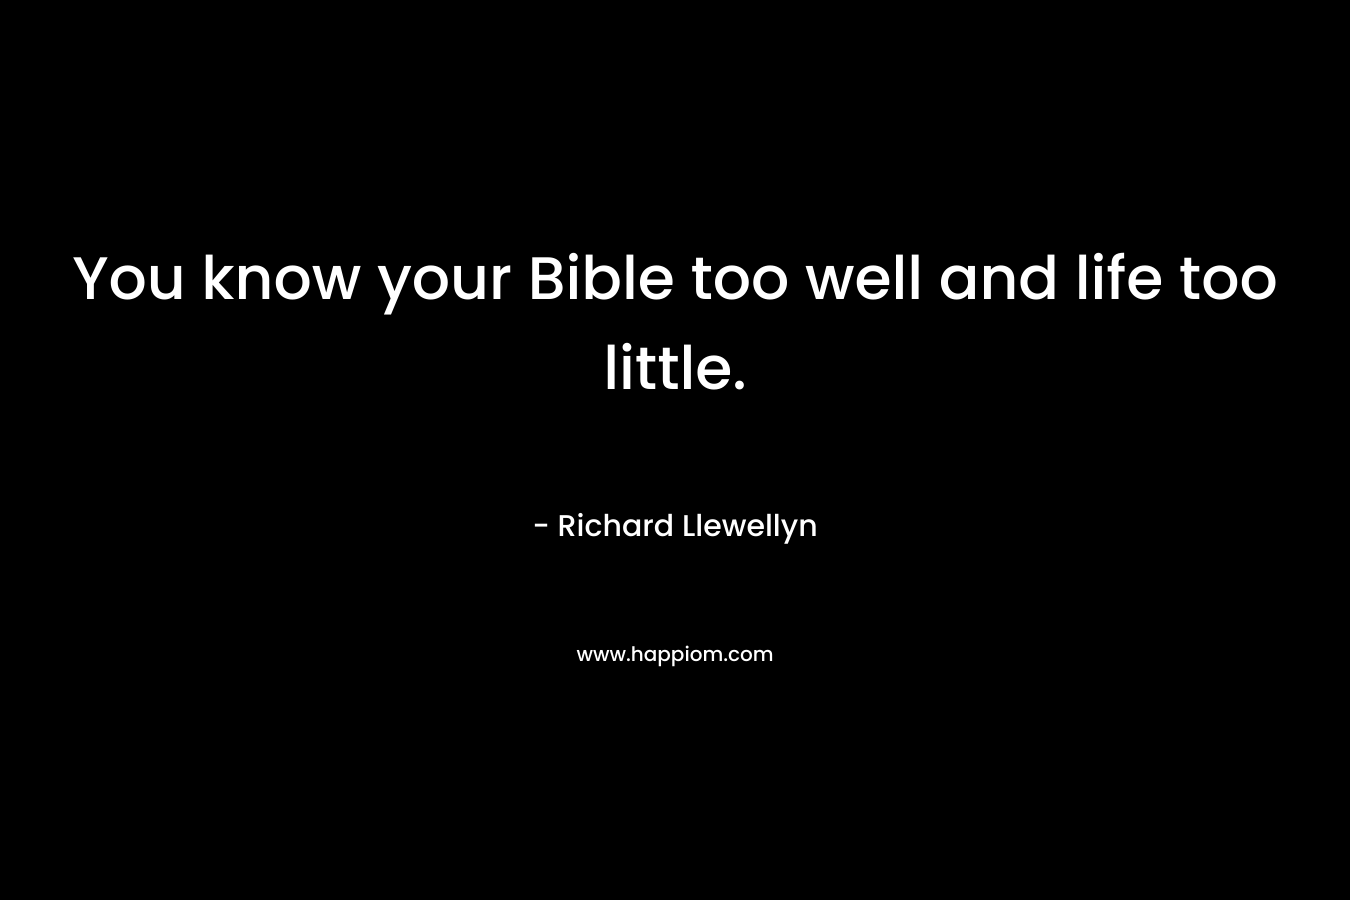 You know your Bible too well and life too little. – Richard Llewellyn